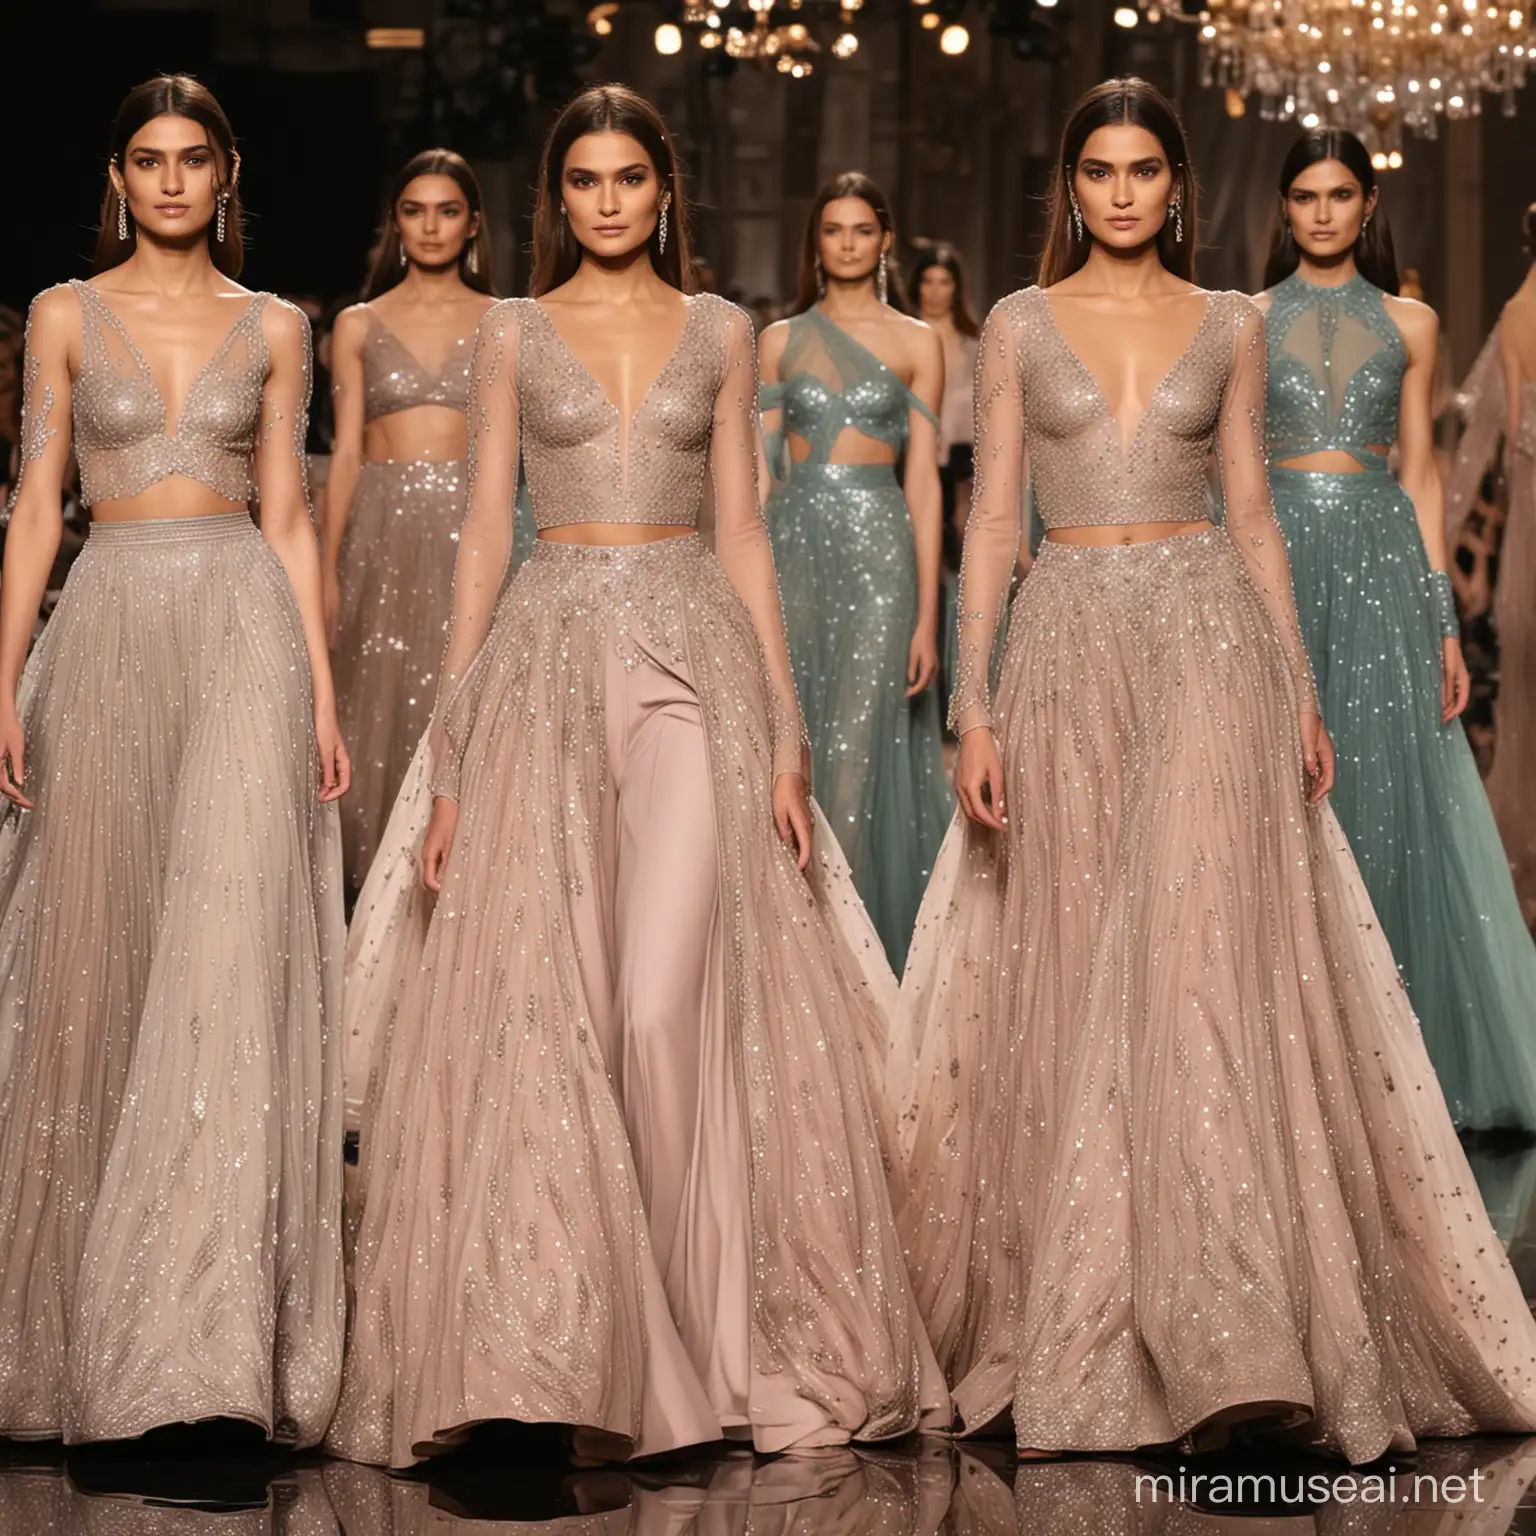 A realistic collaboration between Manish Malhotra and Elie Saab (show products and both designers' aesthetic)